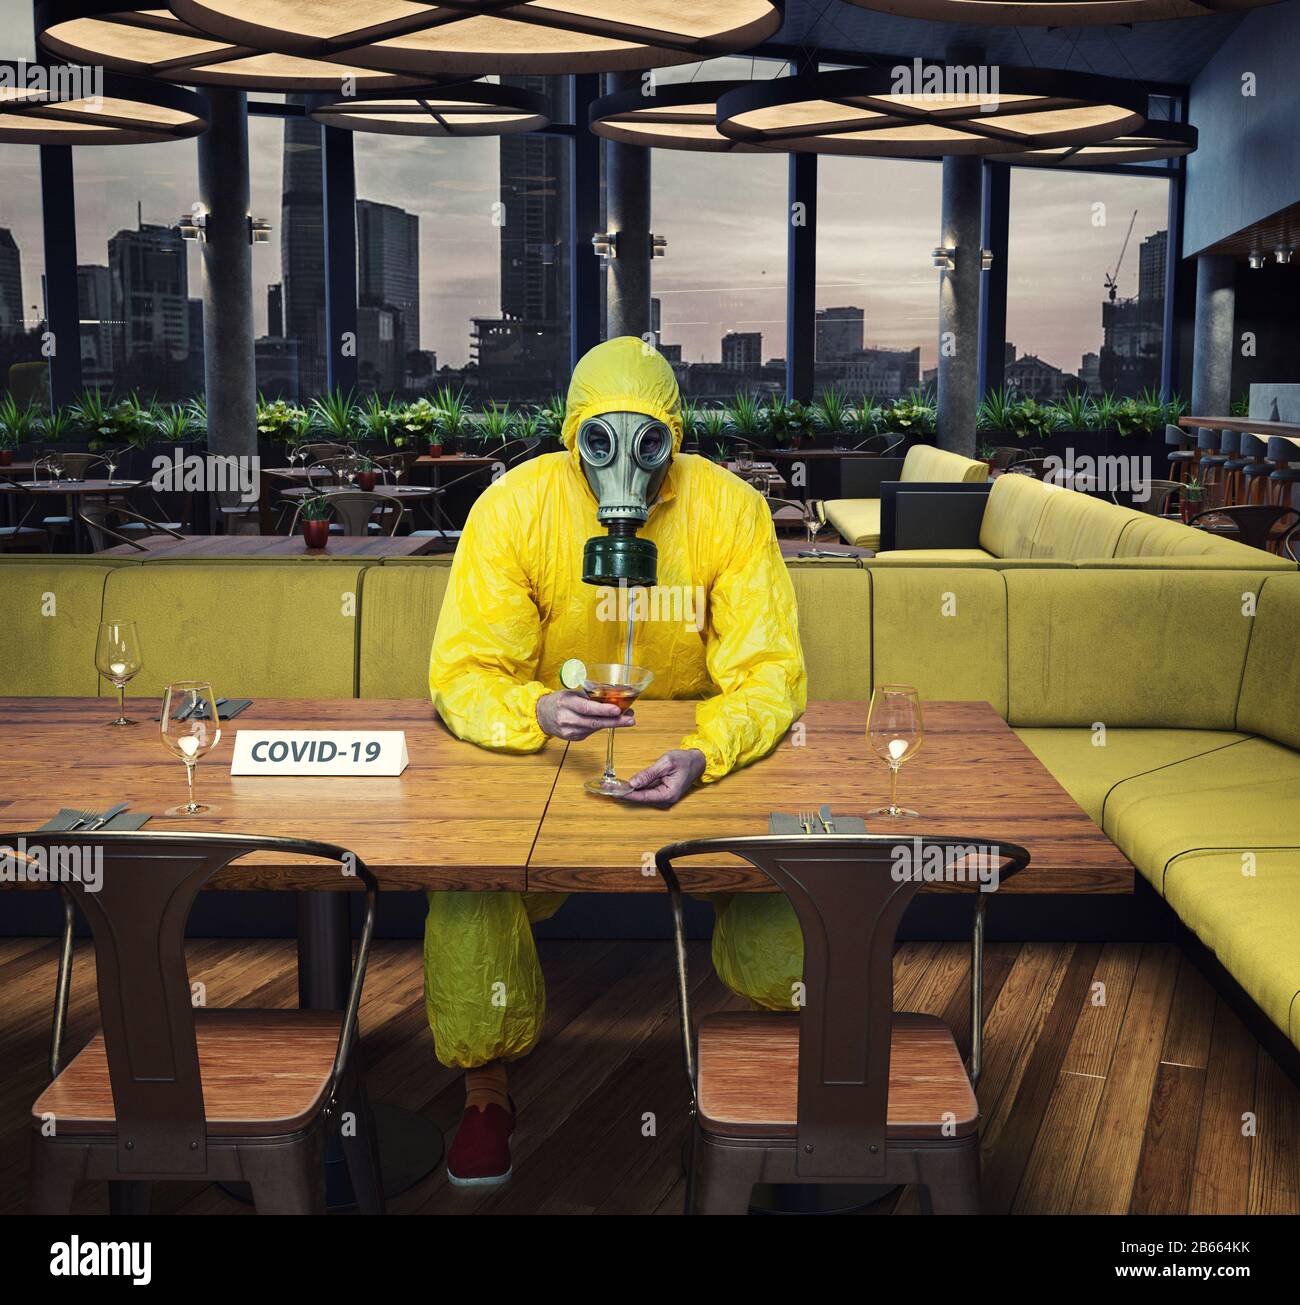 the gas mask man in the cafe interior. Photo and media mixed  concept Stock Photo